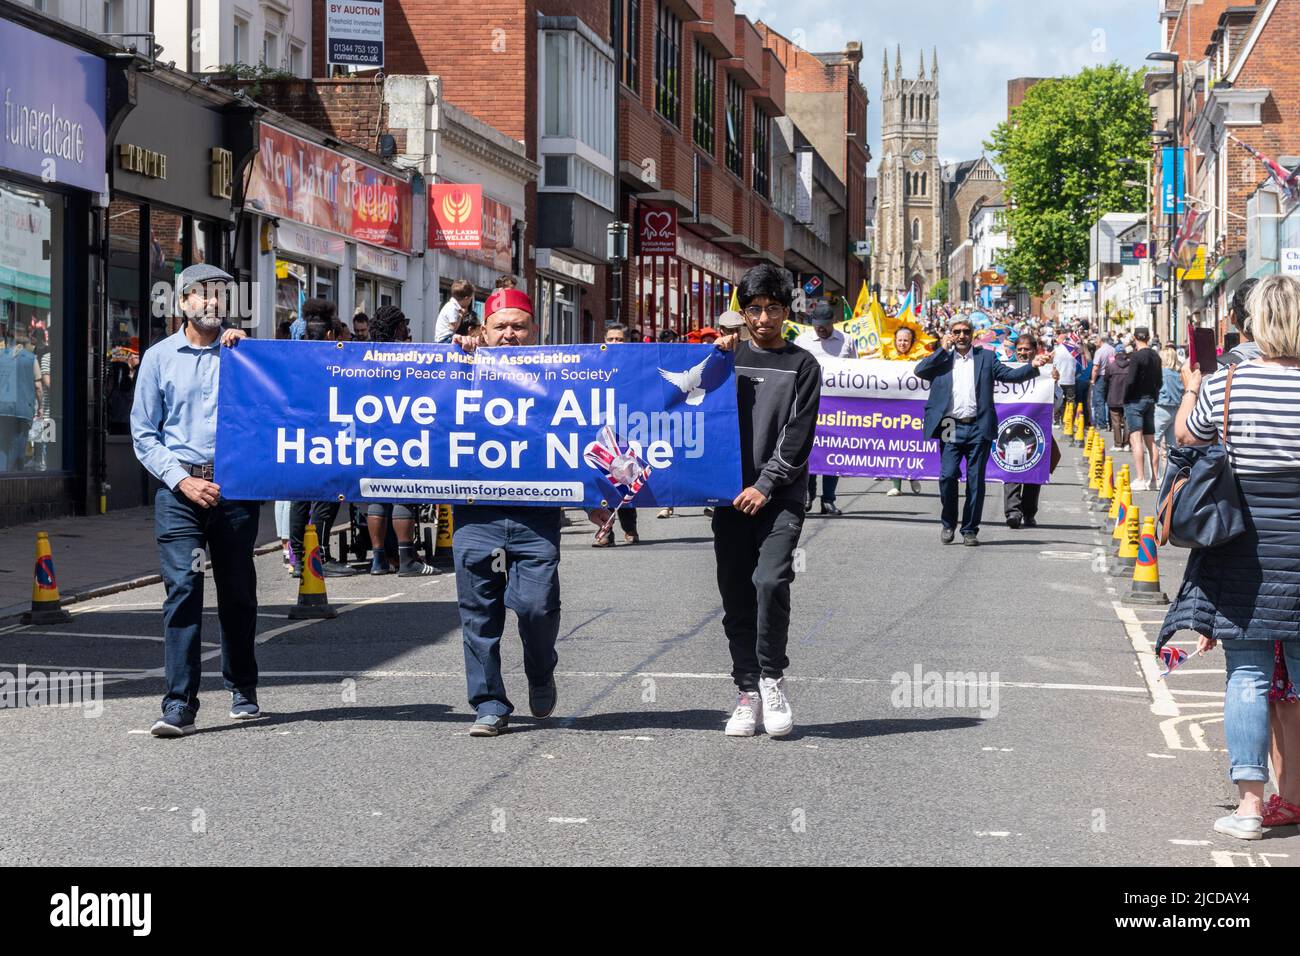 Ahmadiyya Muslim Association taking part in the Grand Parade at Victoria Day, an annual event in Aldershot, Hampshire, England, UK Stock Photo